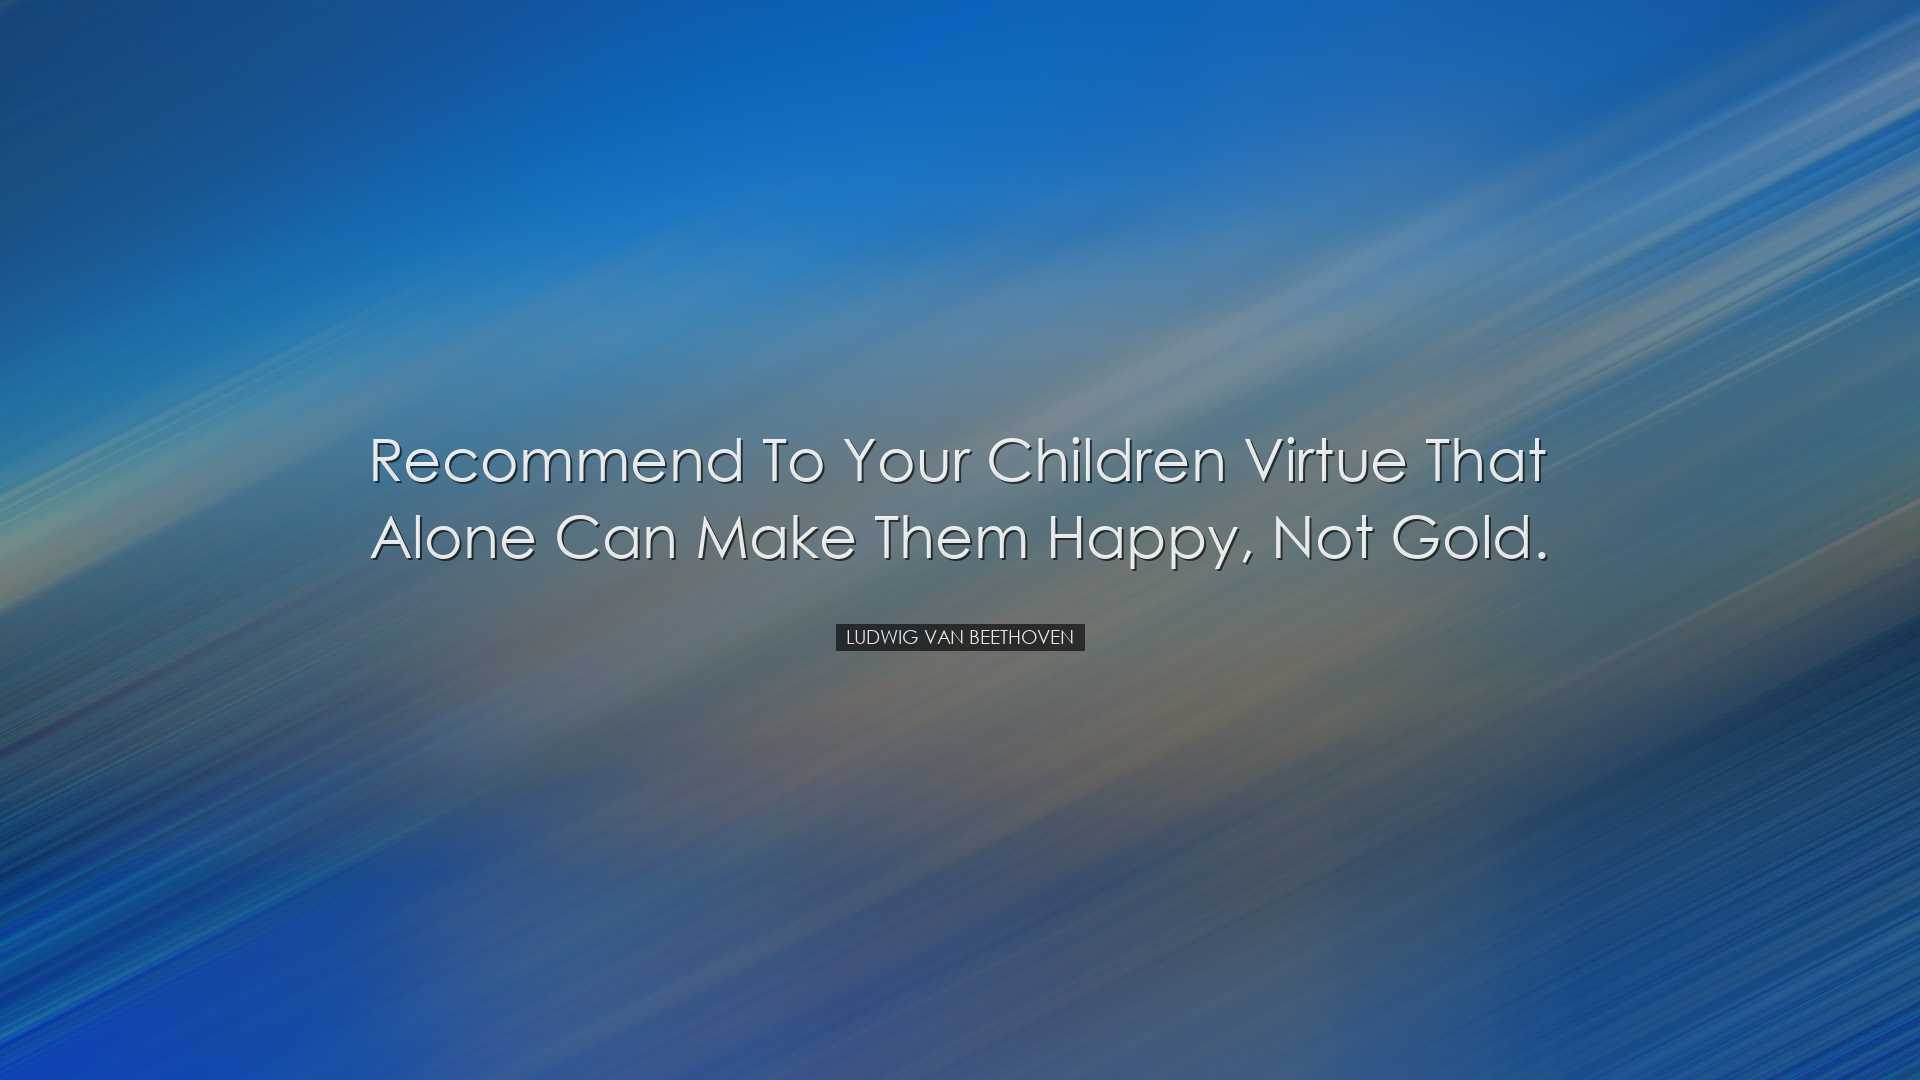 Recommend to your children virtue that alone can make them happy,